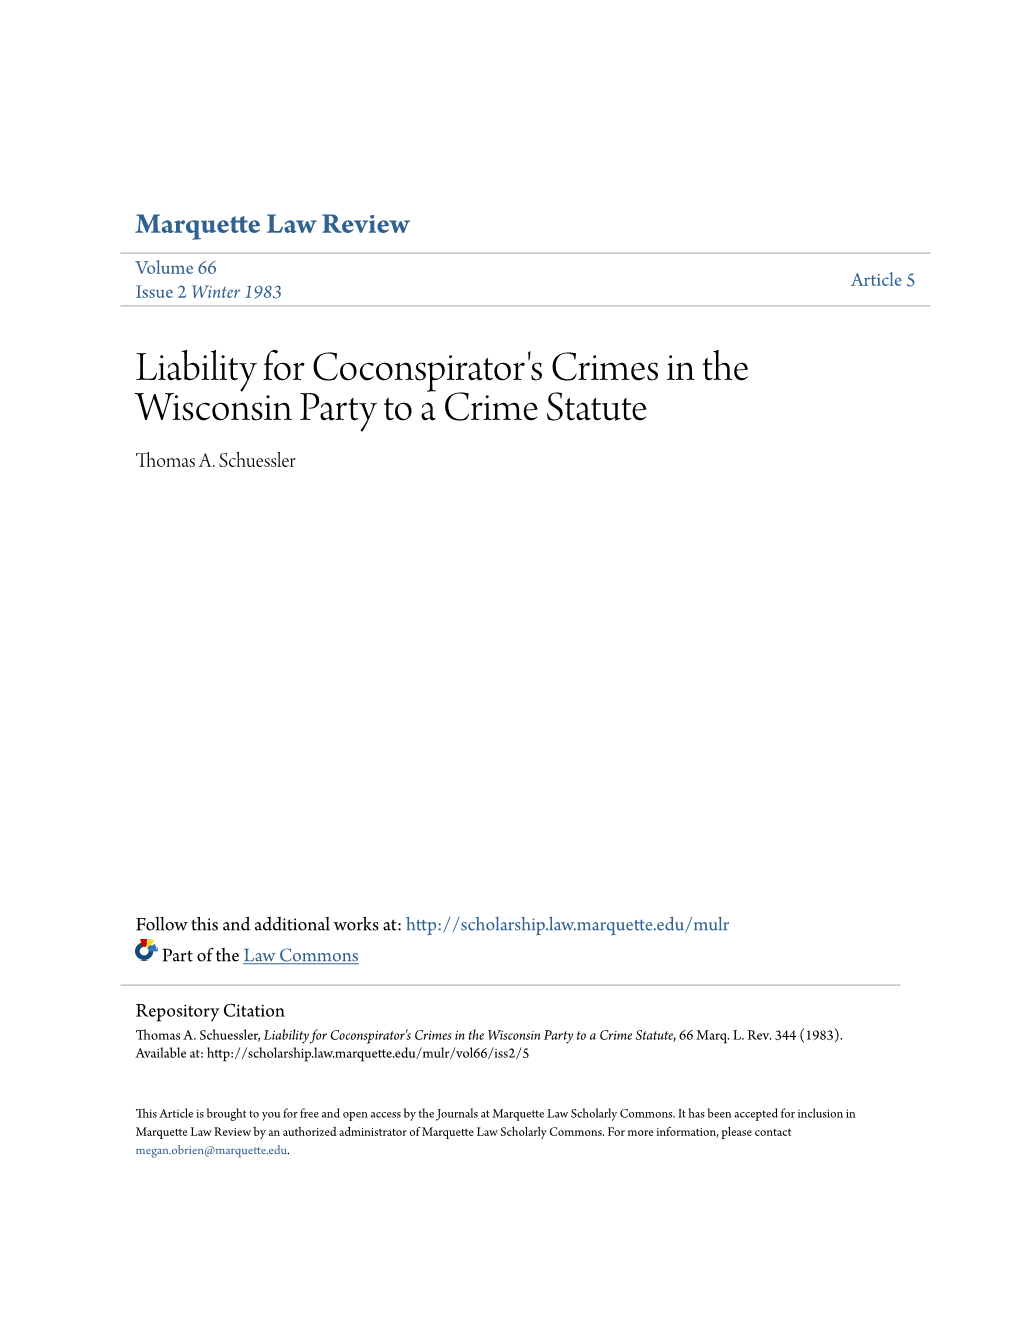 Liability for Coconspirator's Crimes in the Wisconsin Party to a Crime Statute Thomas A